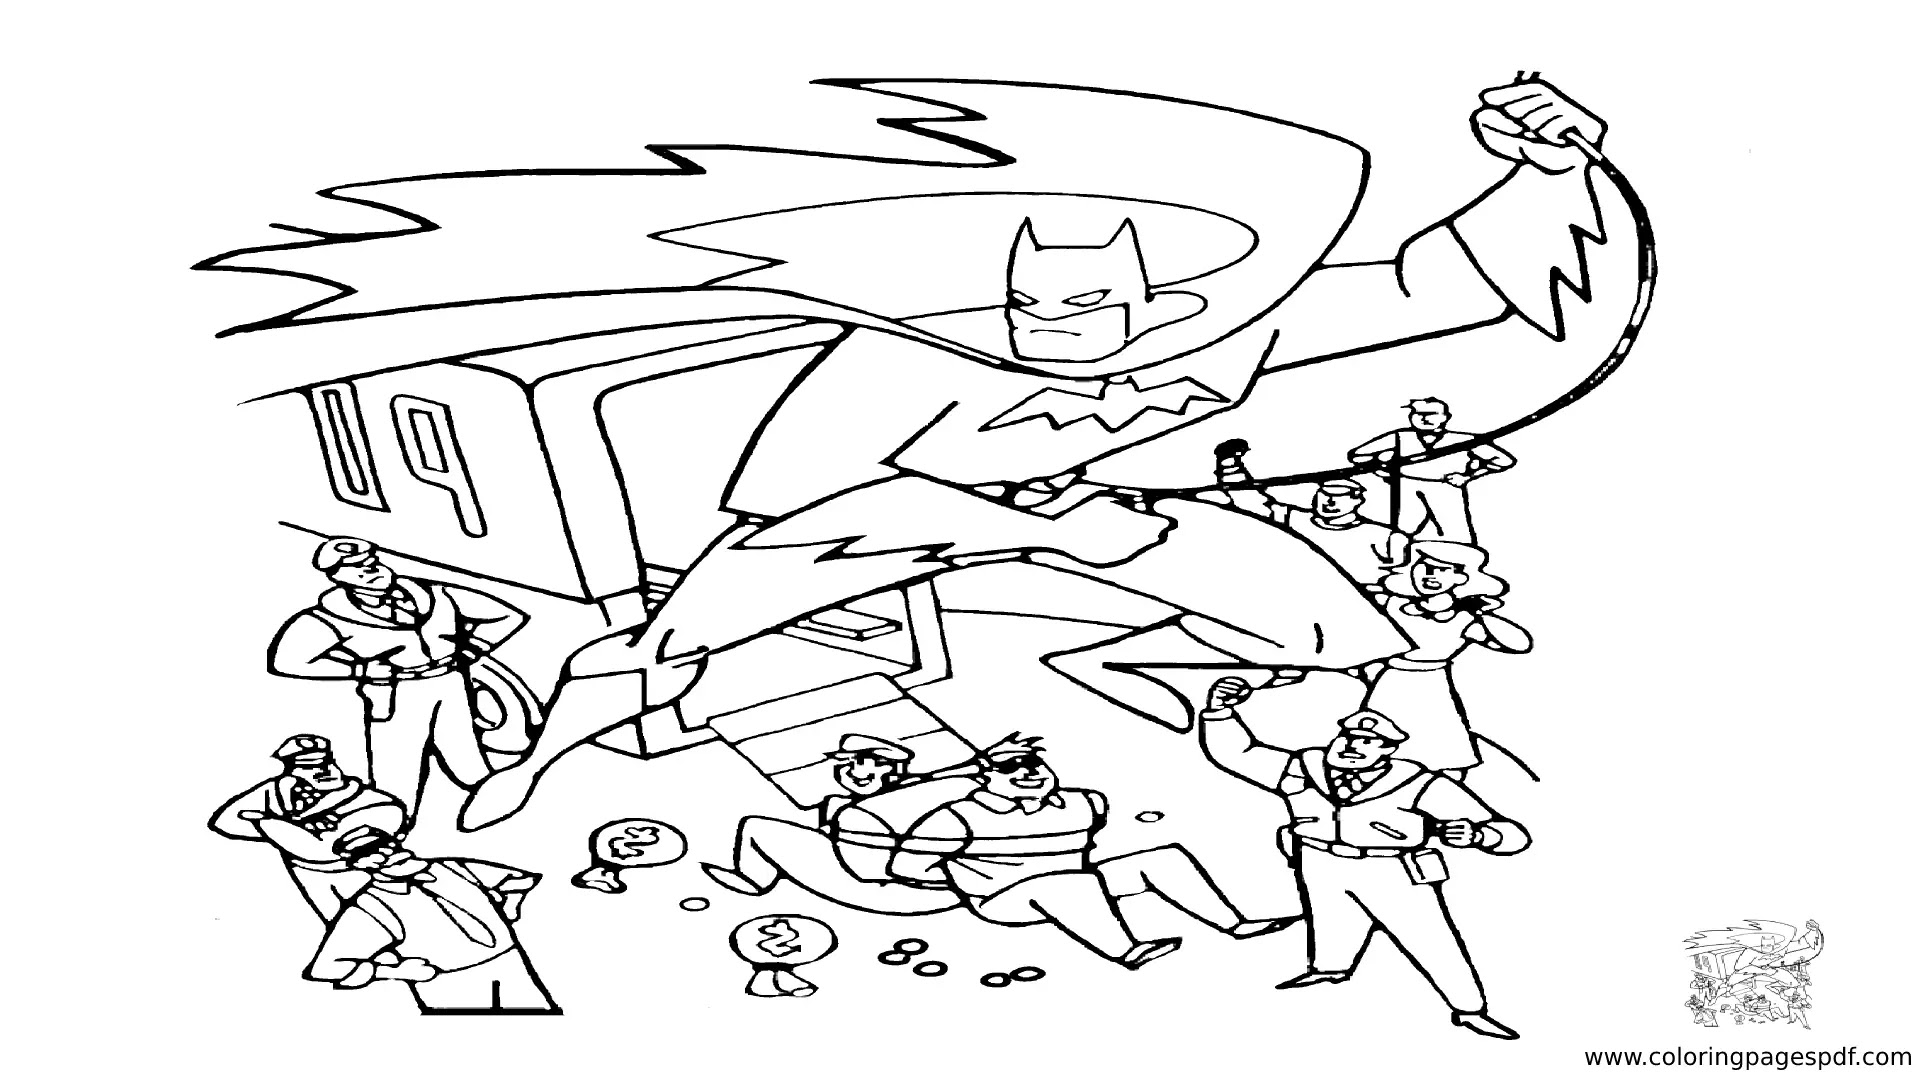 Coloring Pages Of Batman Catching Thieves